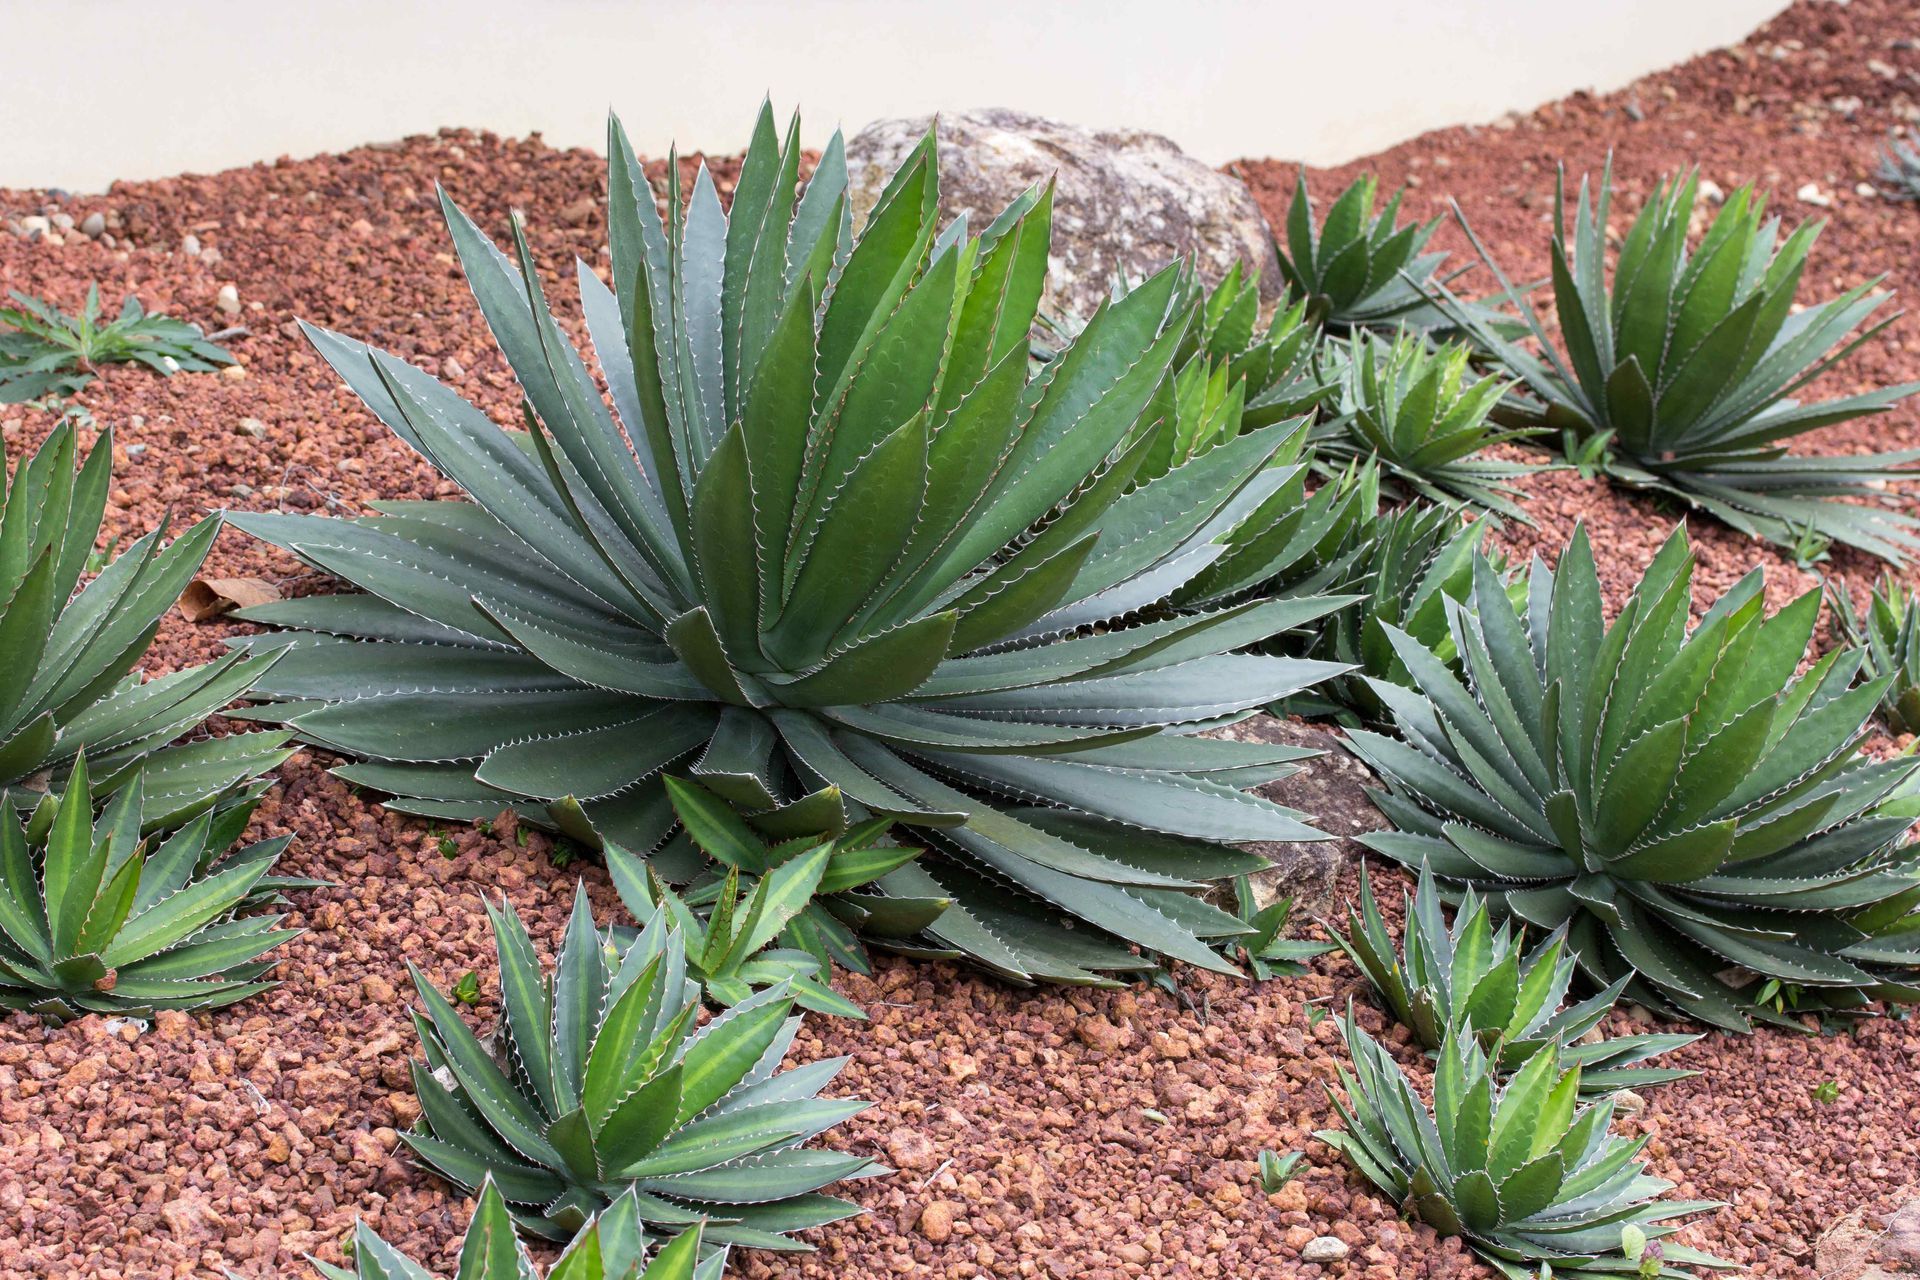 Affordable Xeriscape with Agave Plants in Red Rock Dirt